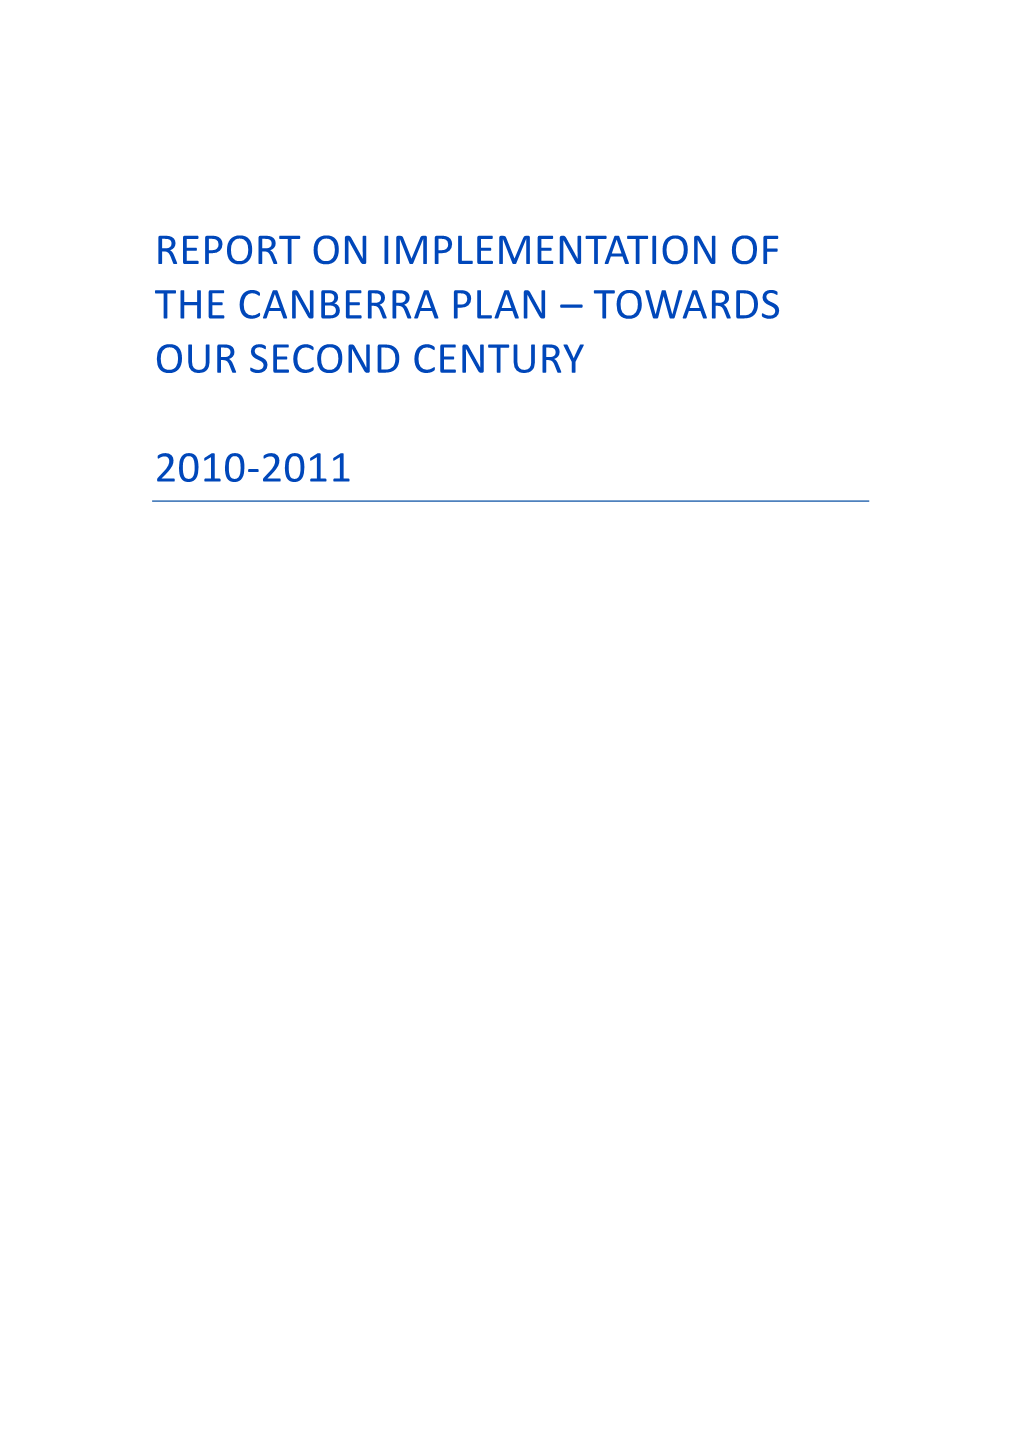 2010-2011 Annual Report on Implementation of the Canberra Plan